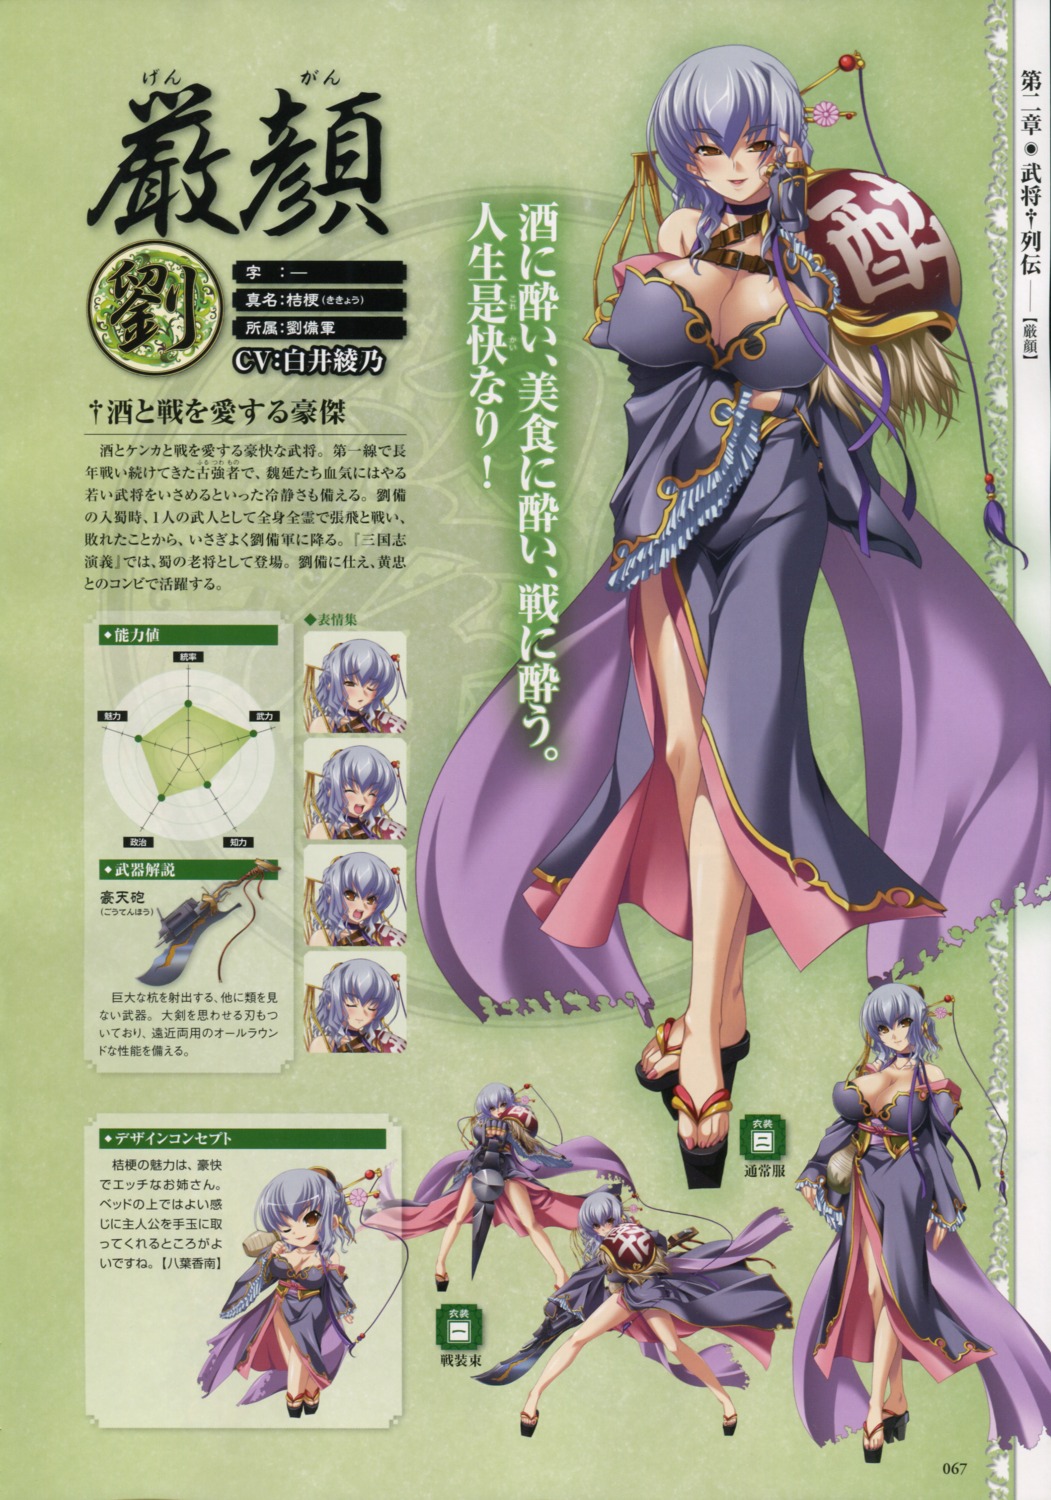 Baseson Koihime Musou Gengan Character Design Cleavage Expression Profile Page Yande Re